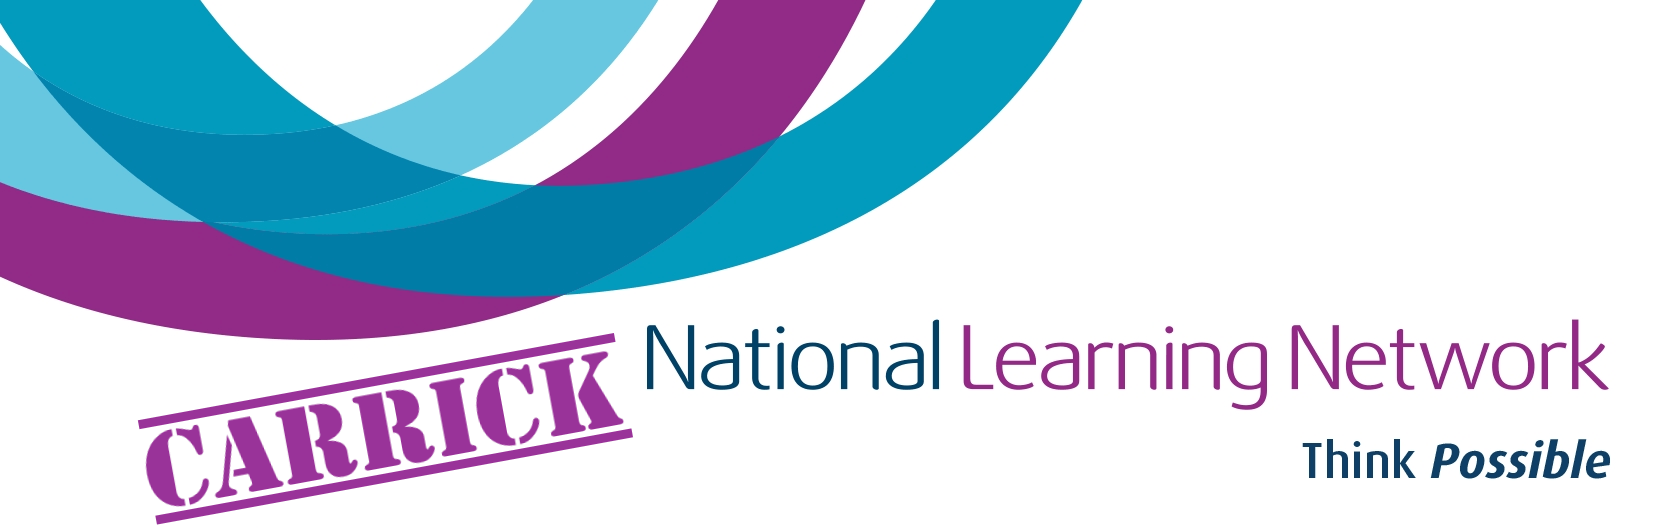 National Learning Network Carrick